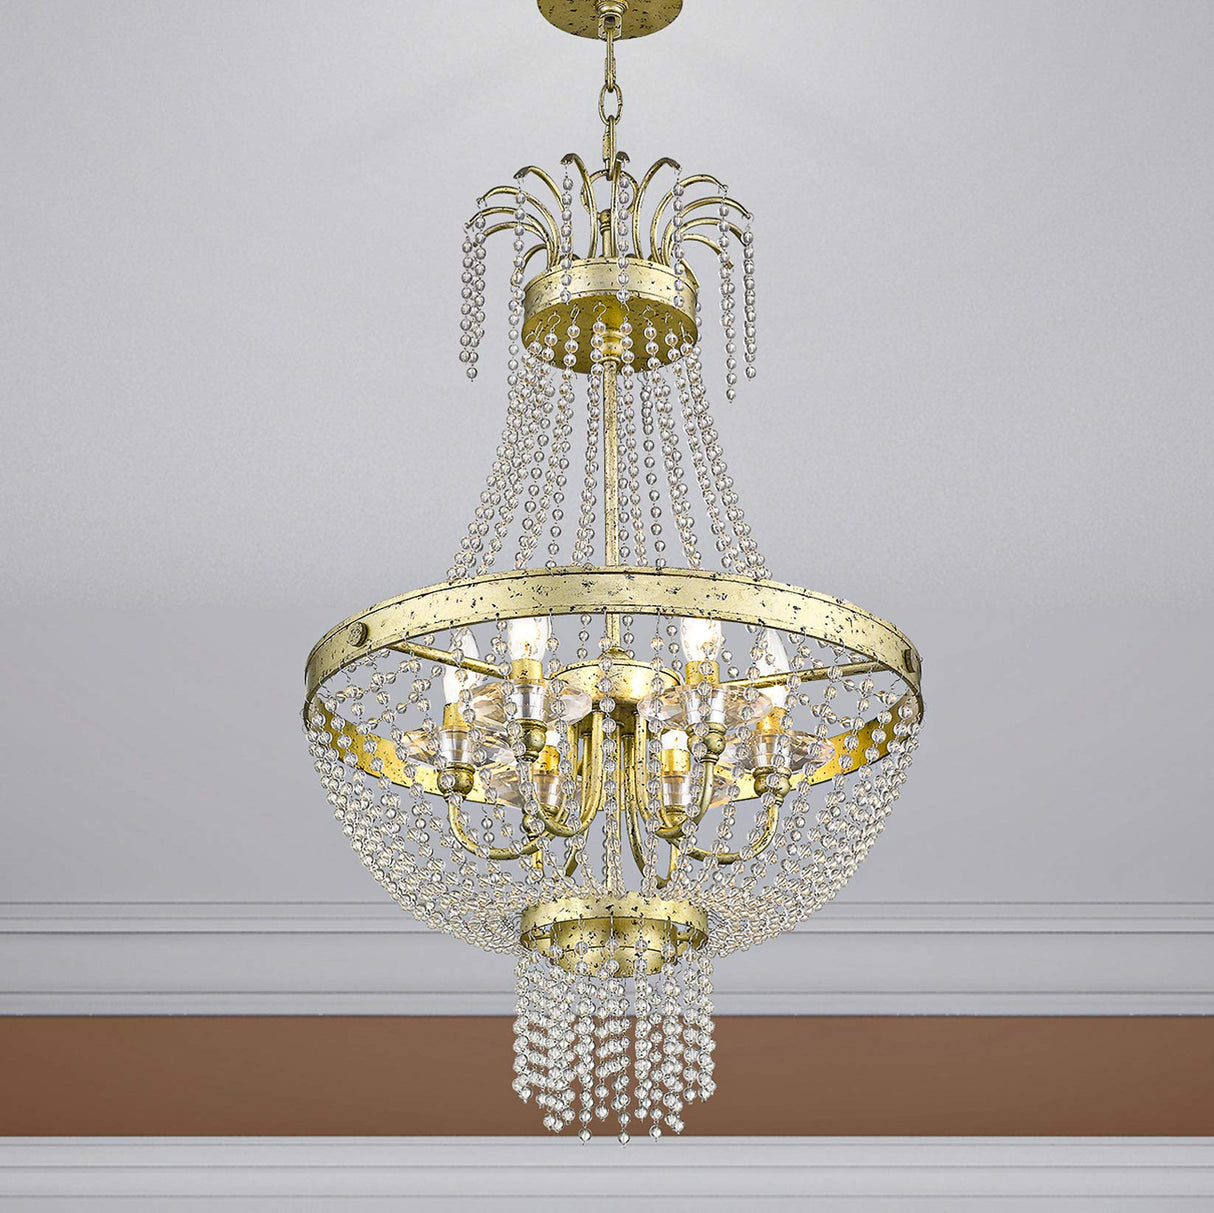 Livex Lighting 51856-28 Crystal Six Light Pendant from Valentina Collection, Champ, Gld Leaf Finish, Hand Applied Winter Gold